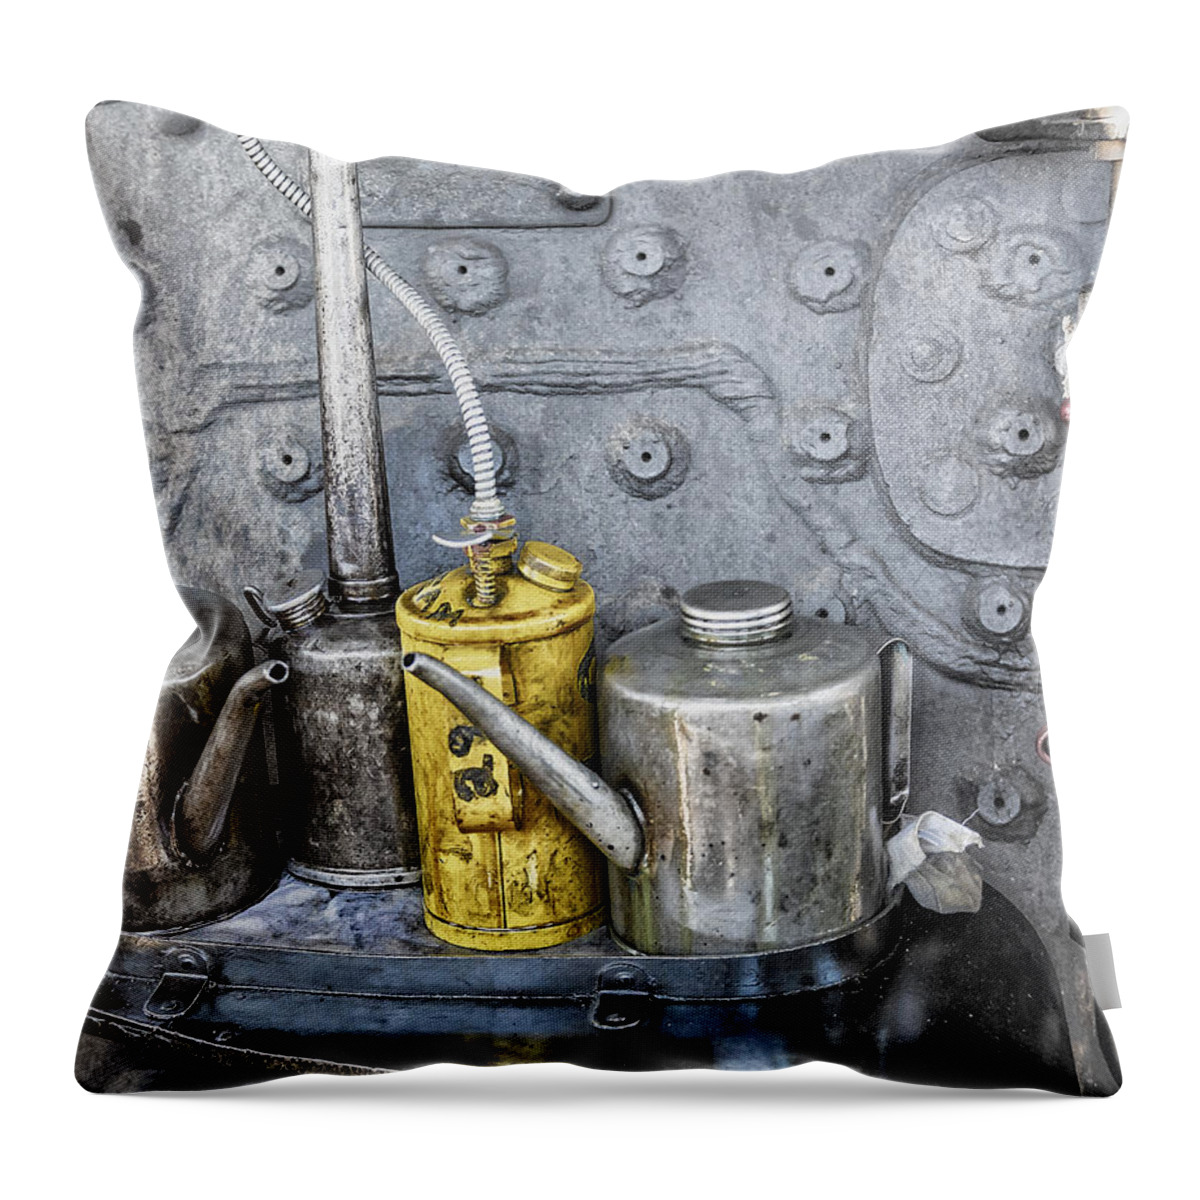 Excursion Trains Throw Pillow featuring the photograph Oil Cans by Jim Thompson